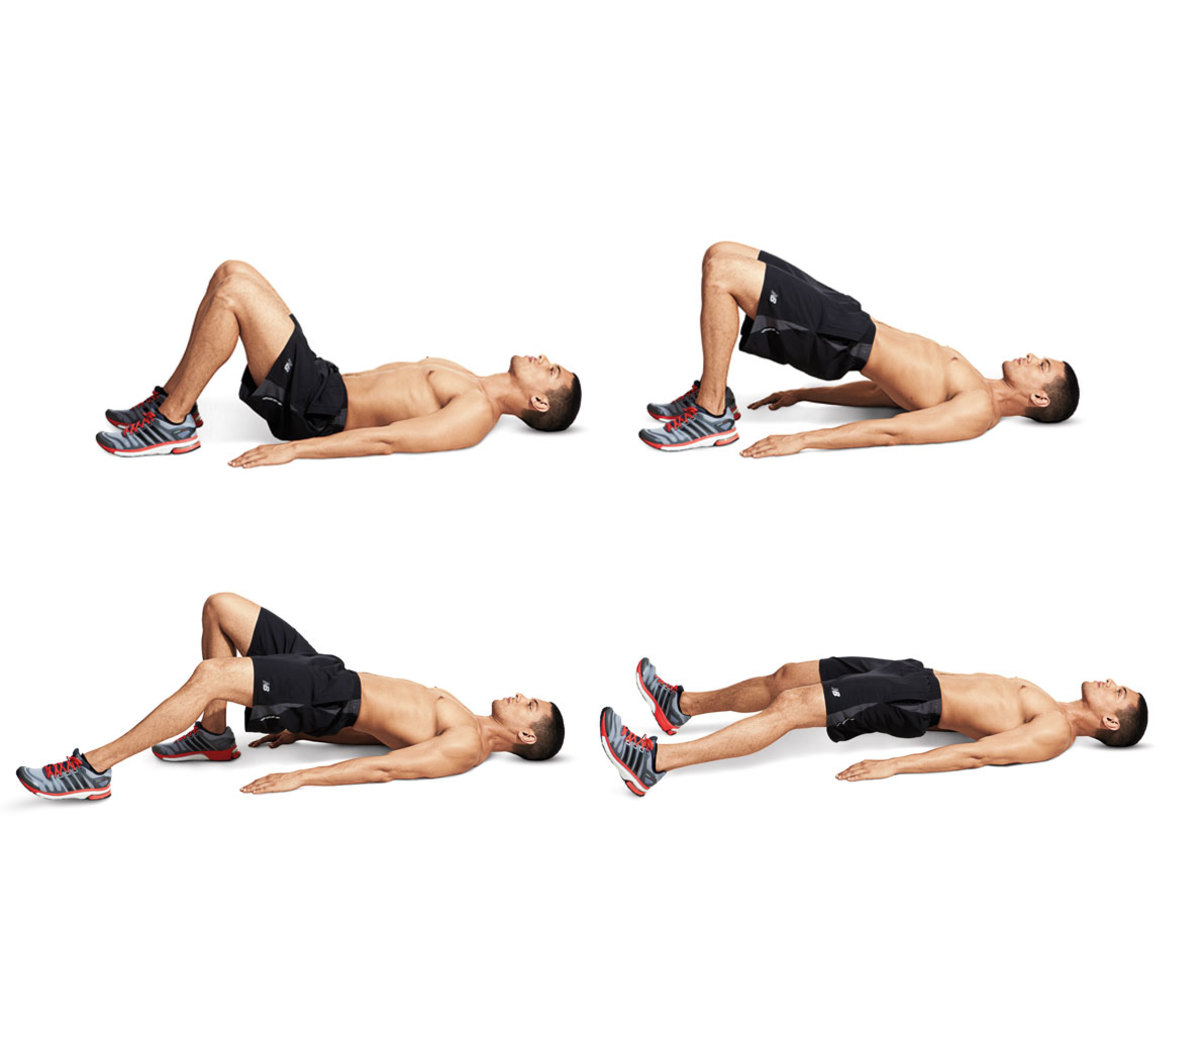 An Expert Guide to the 10 Best Leg Exercises